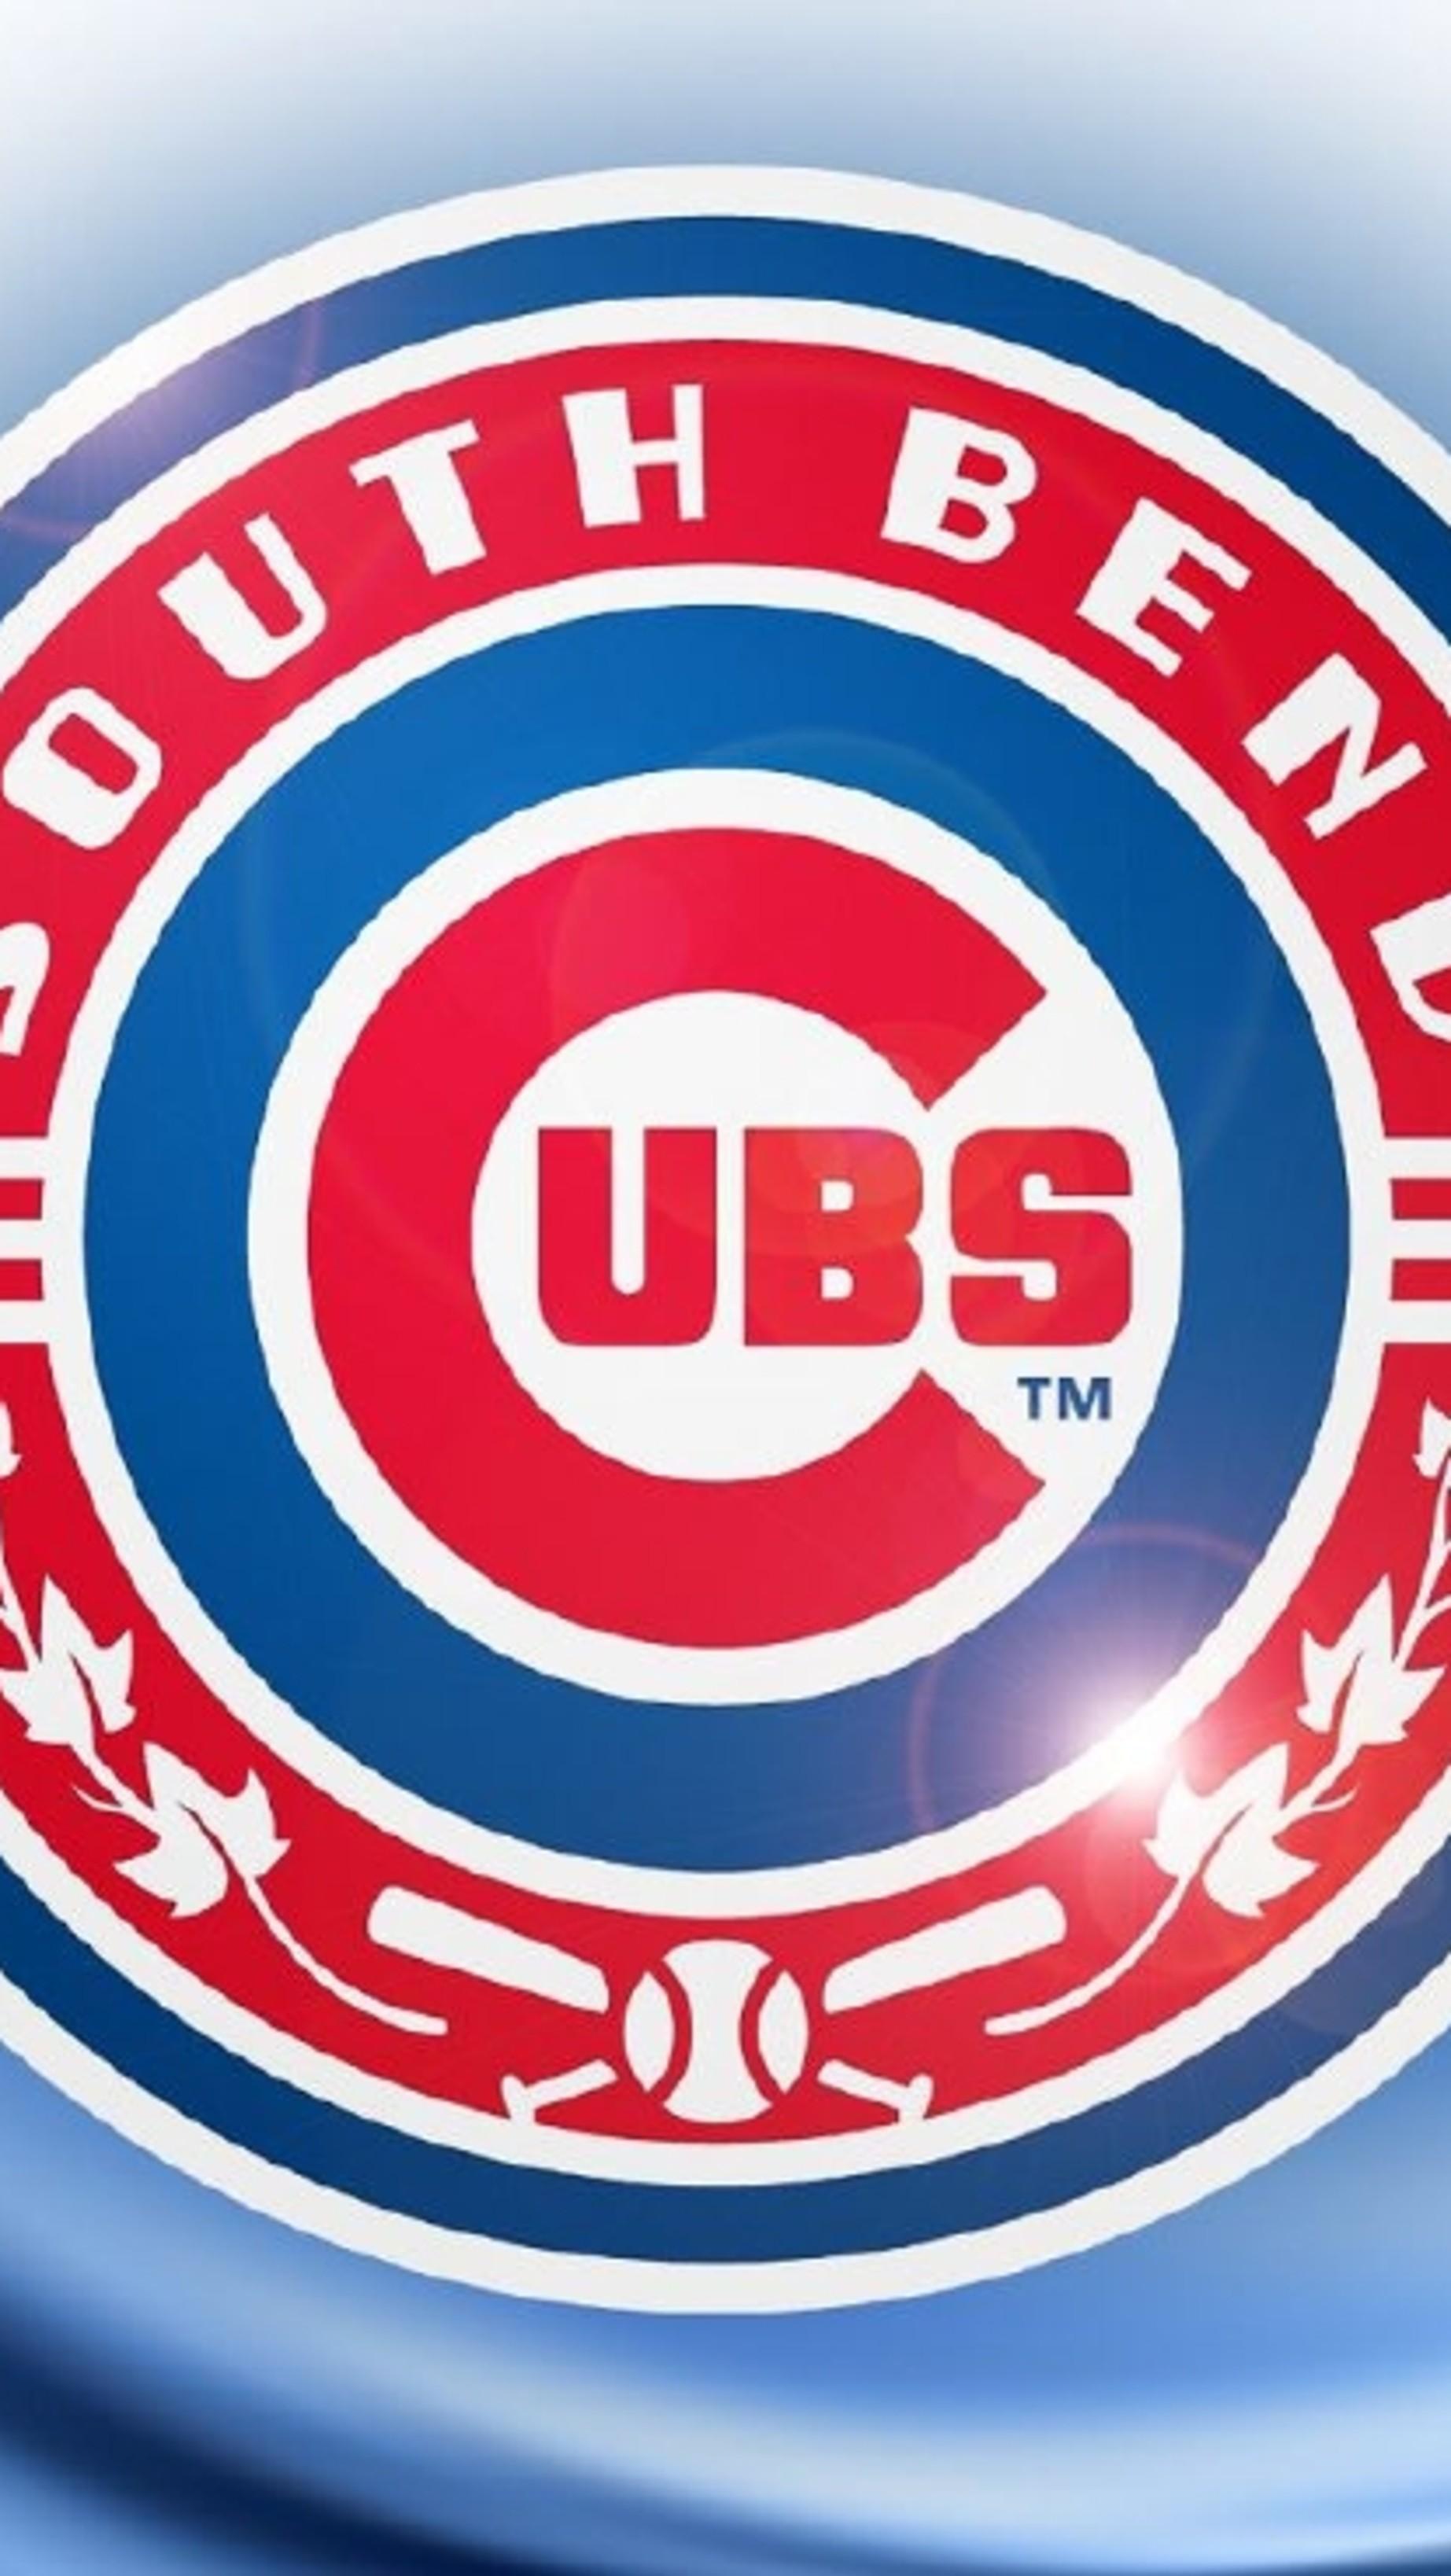 South Bend Cub extend contract with Chicago Cubs through WSBT